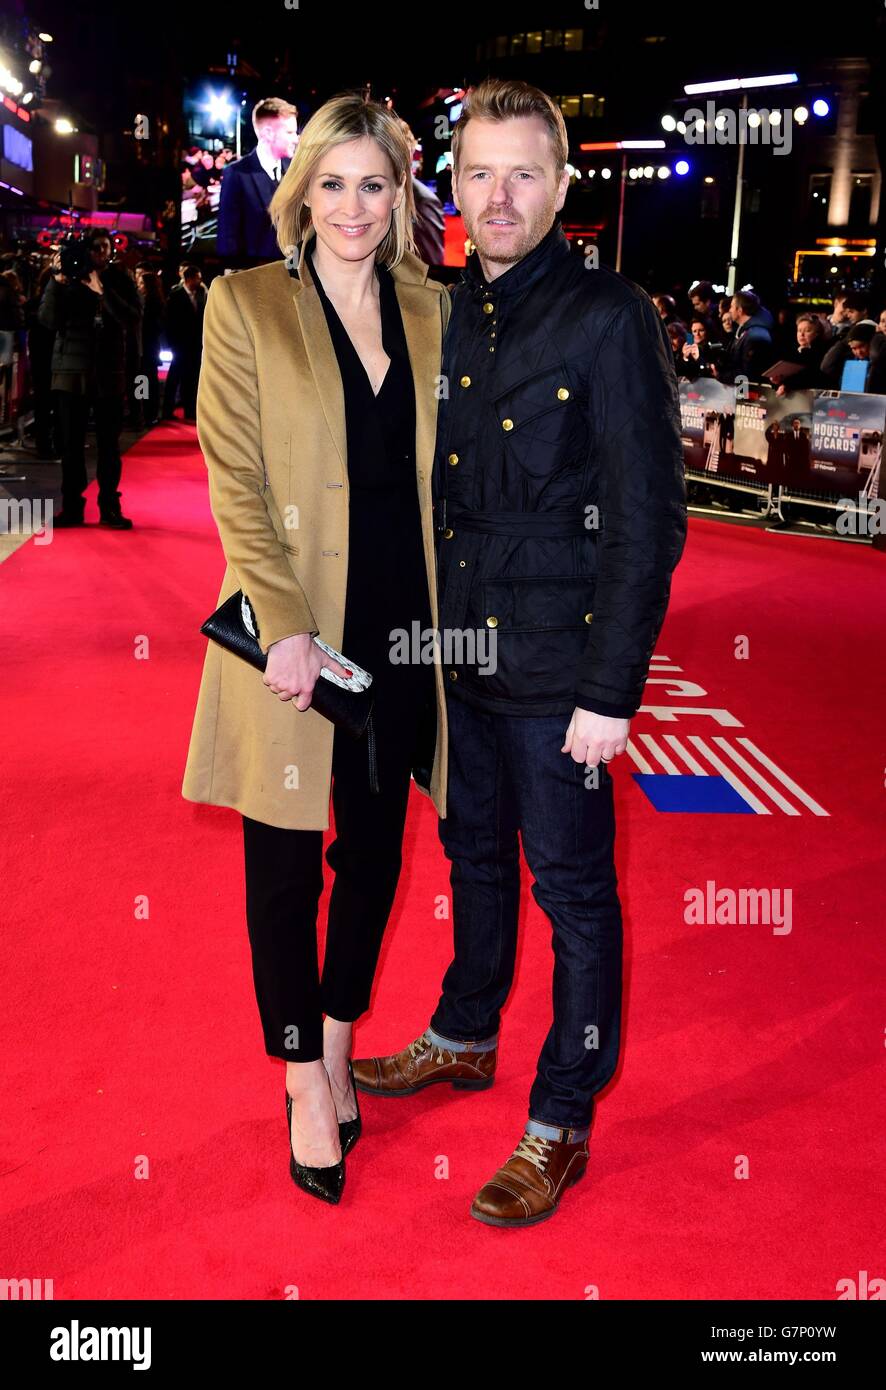 Jenni Falconer (left) and James Midgley attending the world premiere of House of Cards - Season 3 at the Empire Cinema, Leicester Square, London. Stock Photo